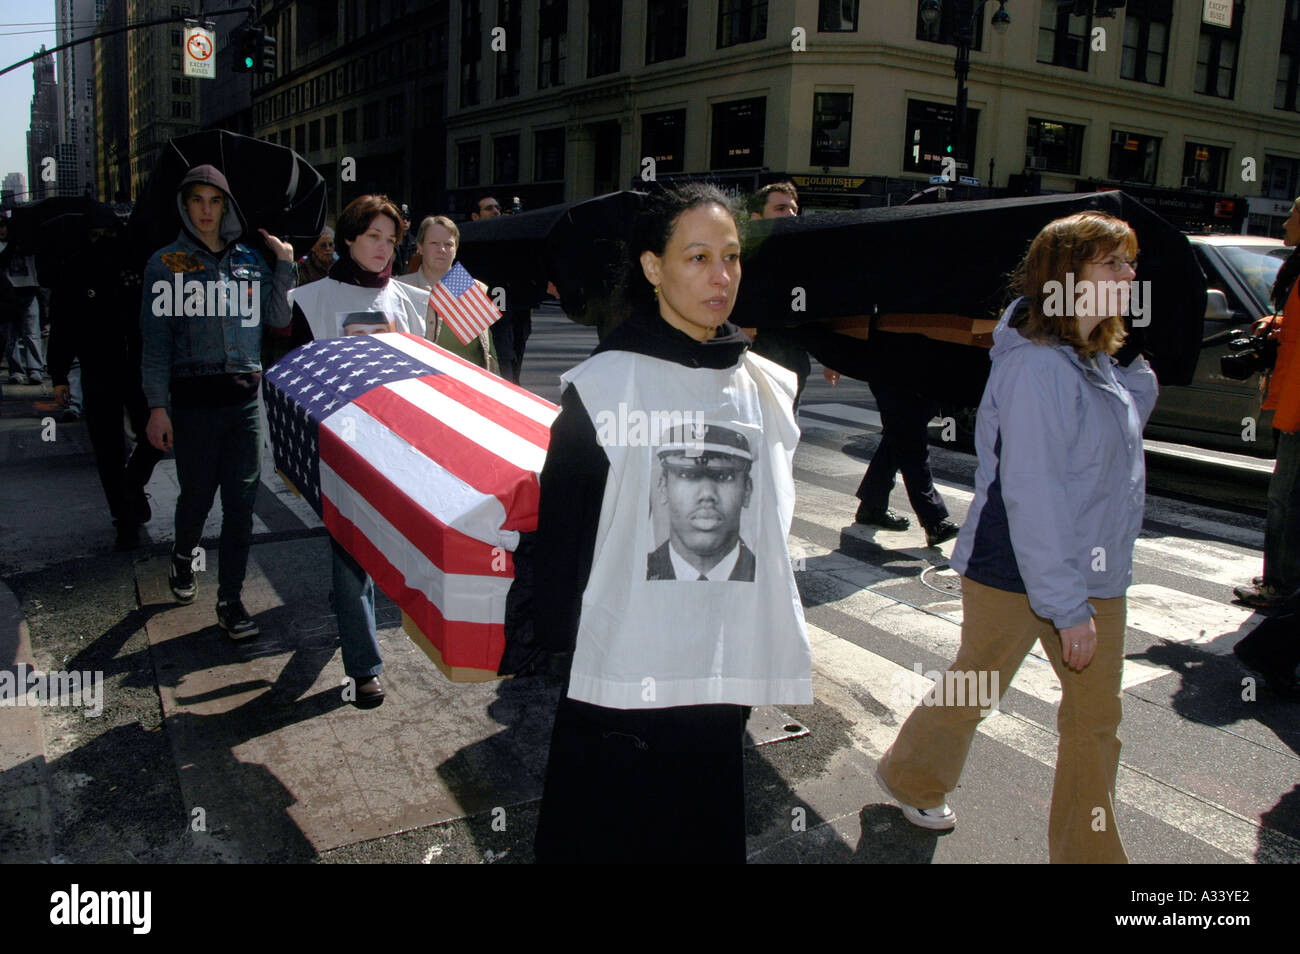 Several hundred members of the War Resisters League and their supporters march with flag draped and black cloth covered coffins on March 19 2005 from the United Nations to the Military Recruiting Station in Times Sqaure The march culminated with an act of civil disobedience by about thirty members of the group The protest was on the second anniversary of the United States invasion of Iraq Richard B Levine Stock Photo